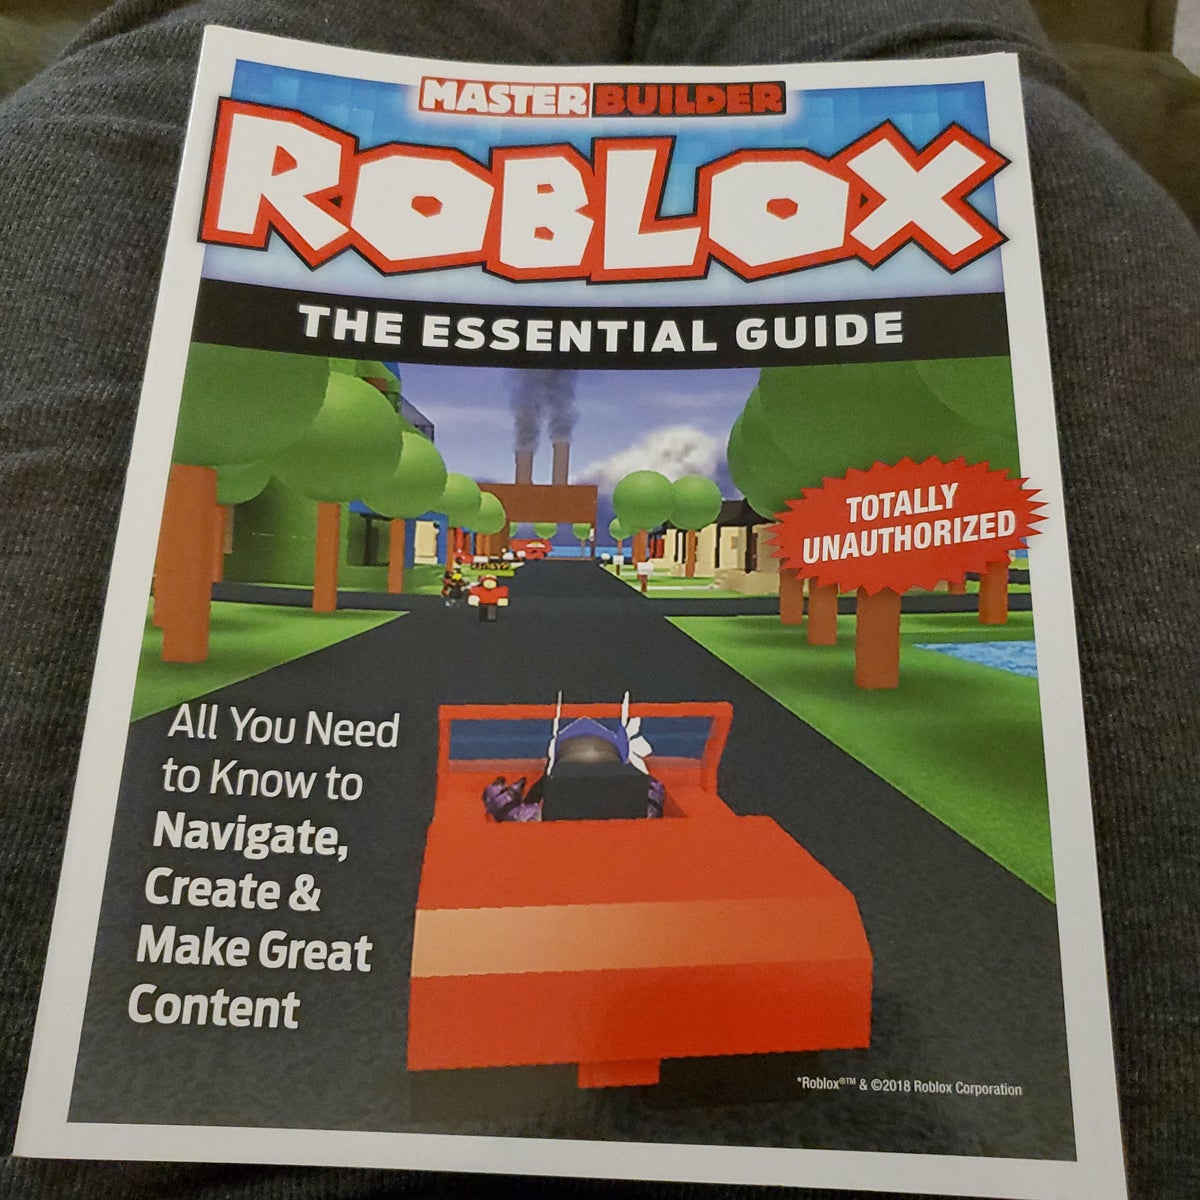 Master Builder Roblox: The Essential Guide by Triumph Books